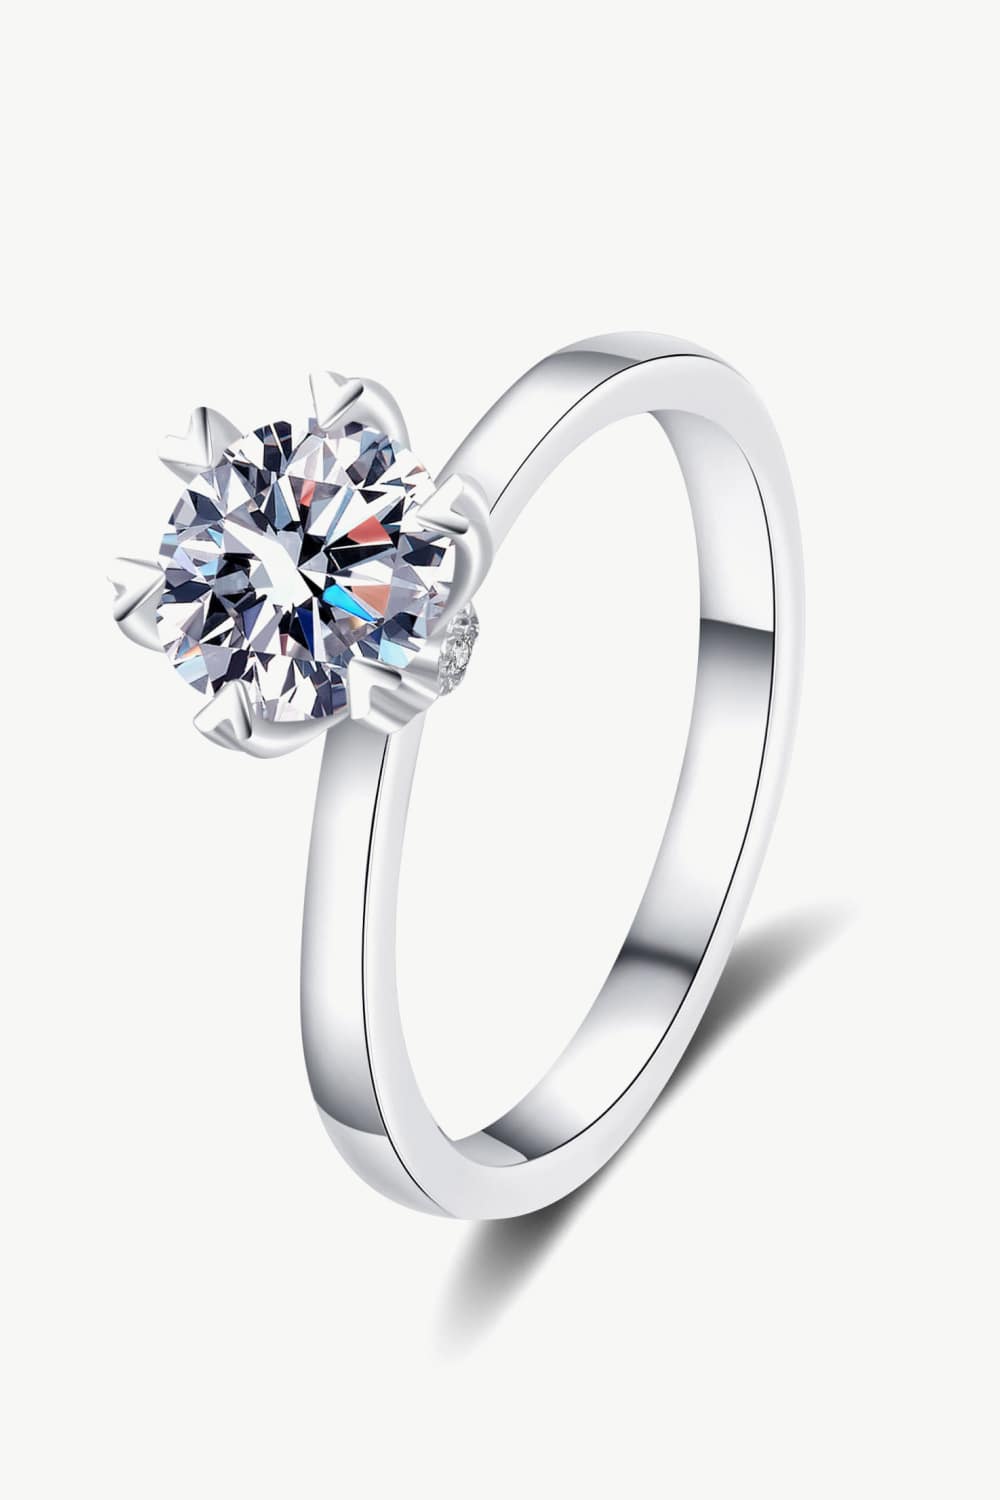 Pleasant Surprise 925 Sterling Silver 1 Carat Moissanite Ring-Rings-Inspired by Justeen-Women's Clothing Boutique in Chicago, Illinois